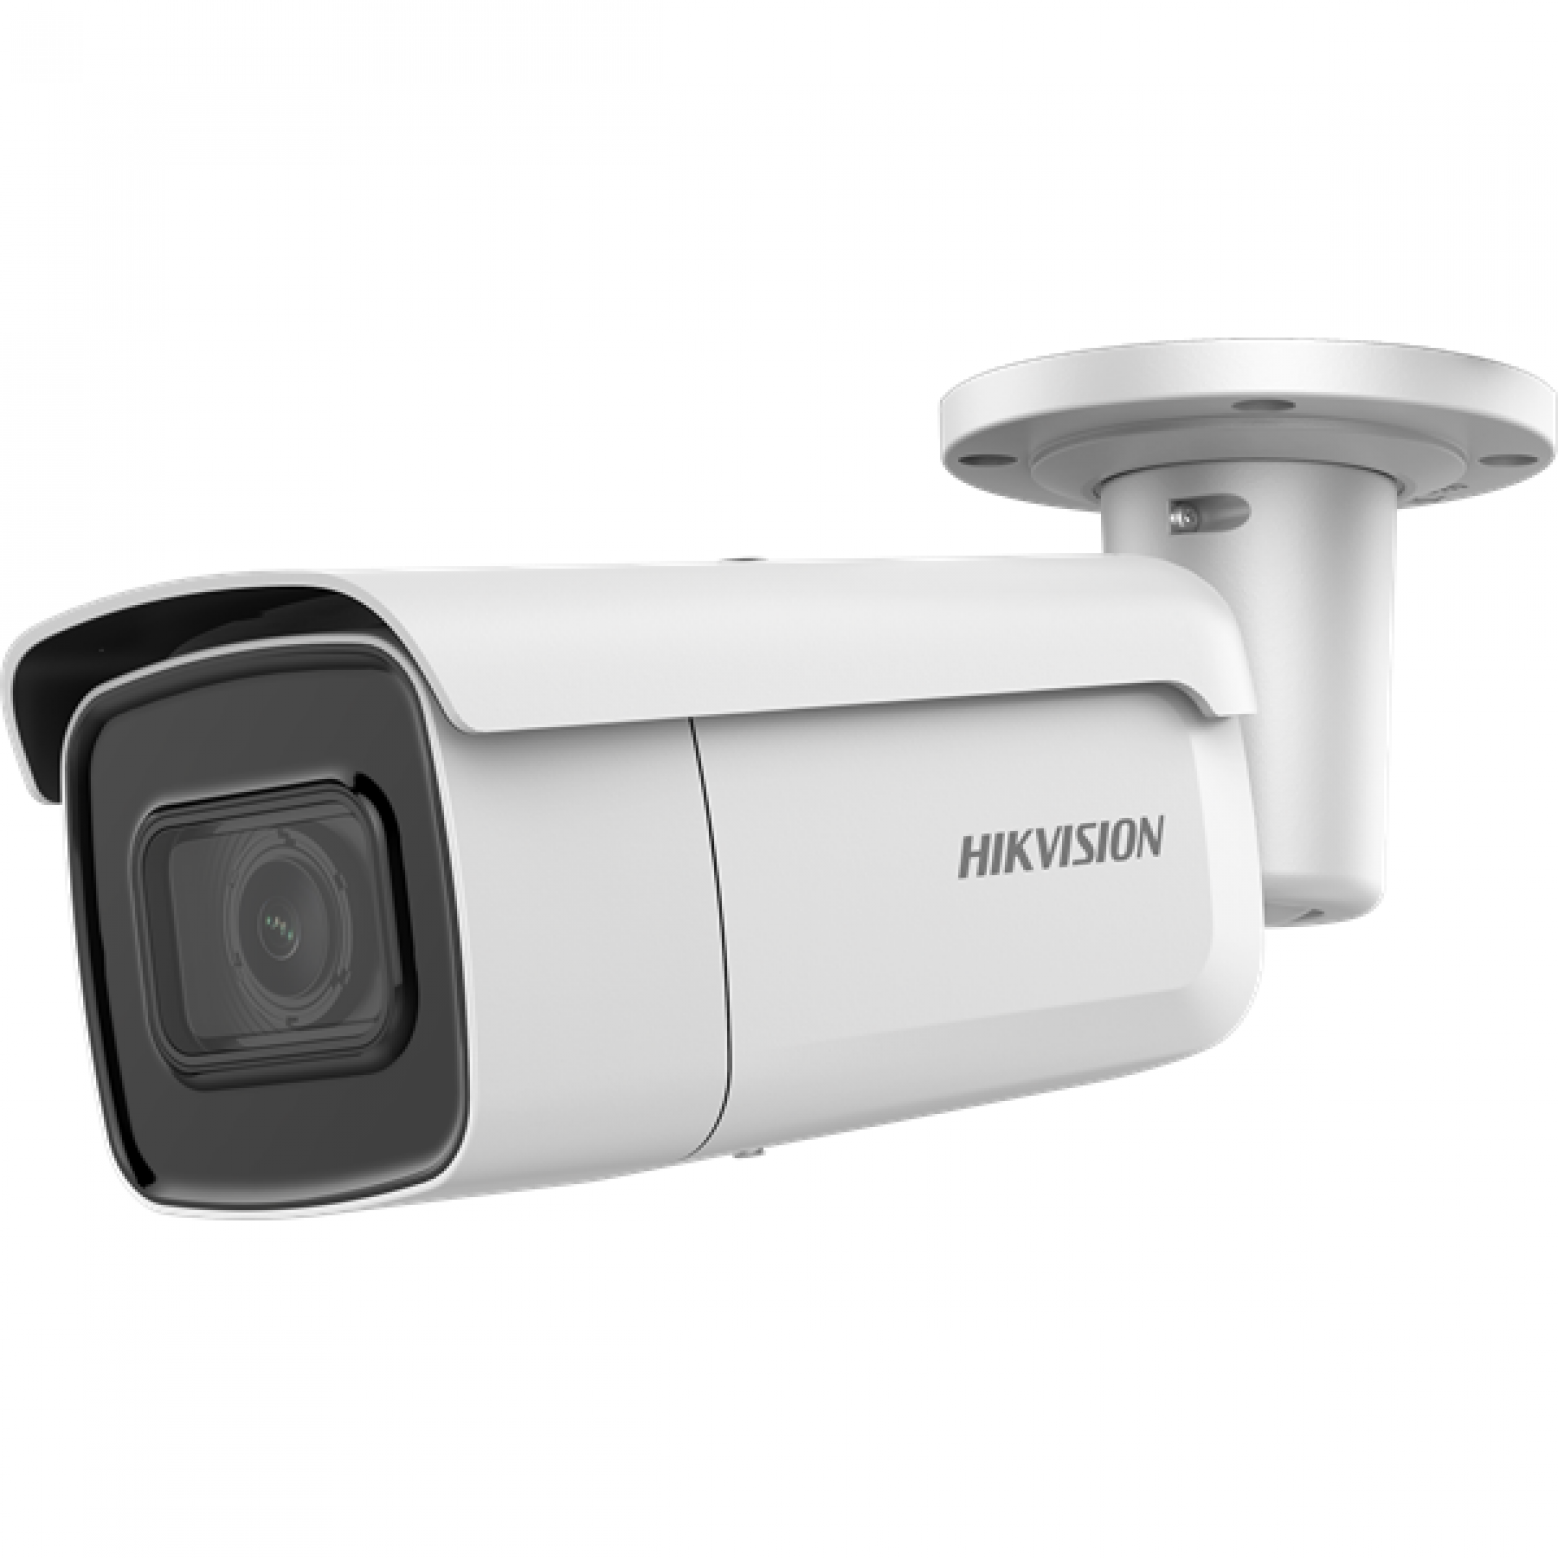 Hikvision DS-2CD2T26G1-4I, AcuSense, 2MP, D/N - IR, WDR 3-Axis, Bullet